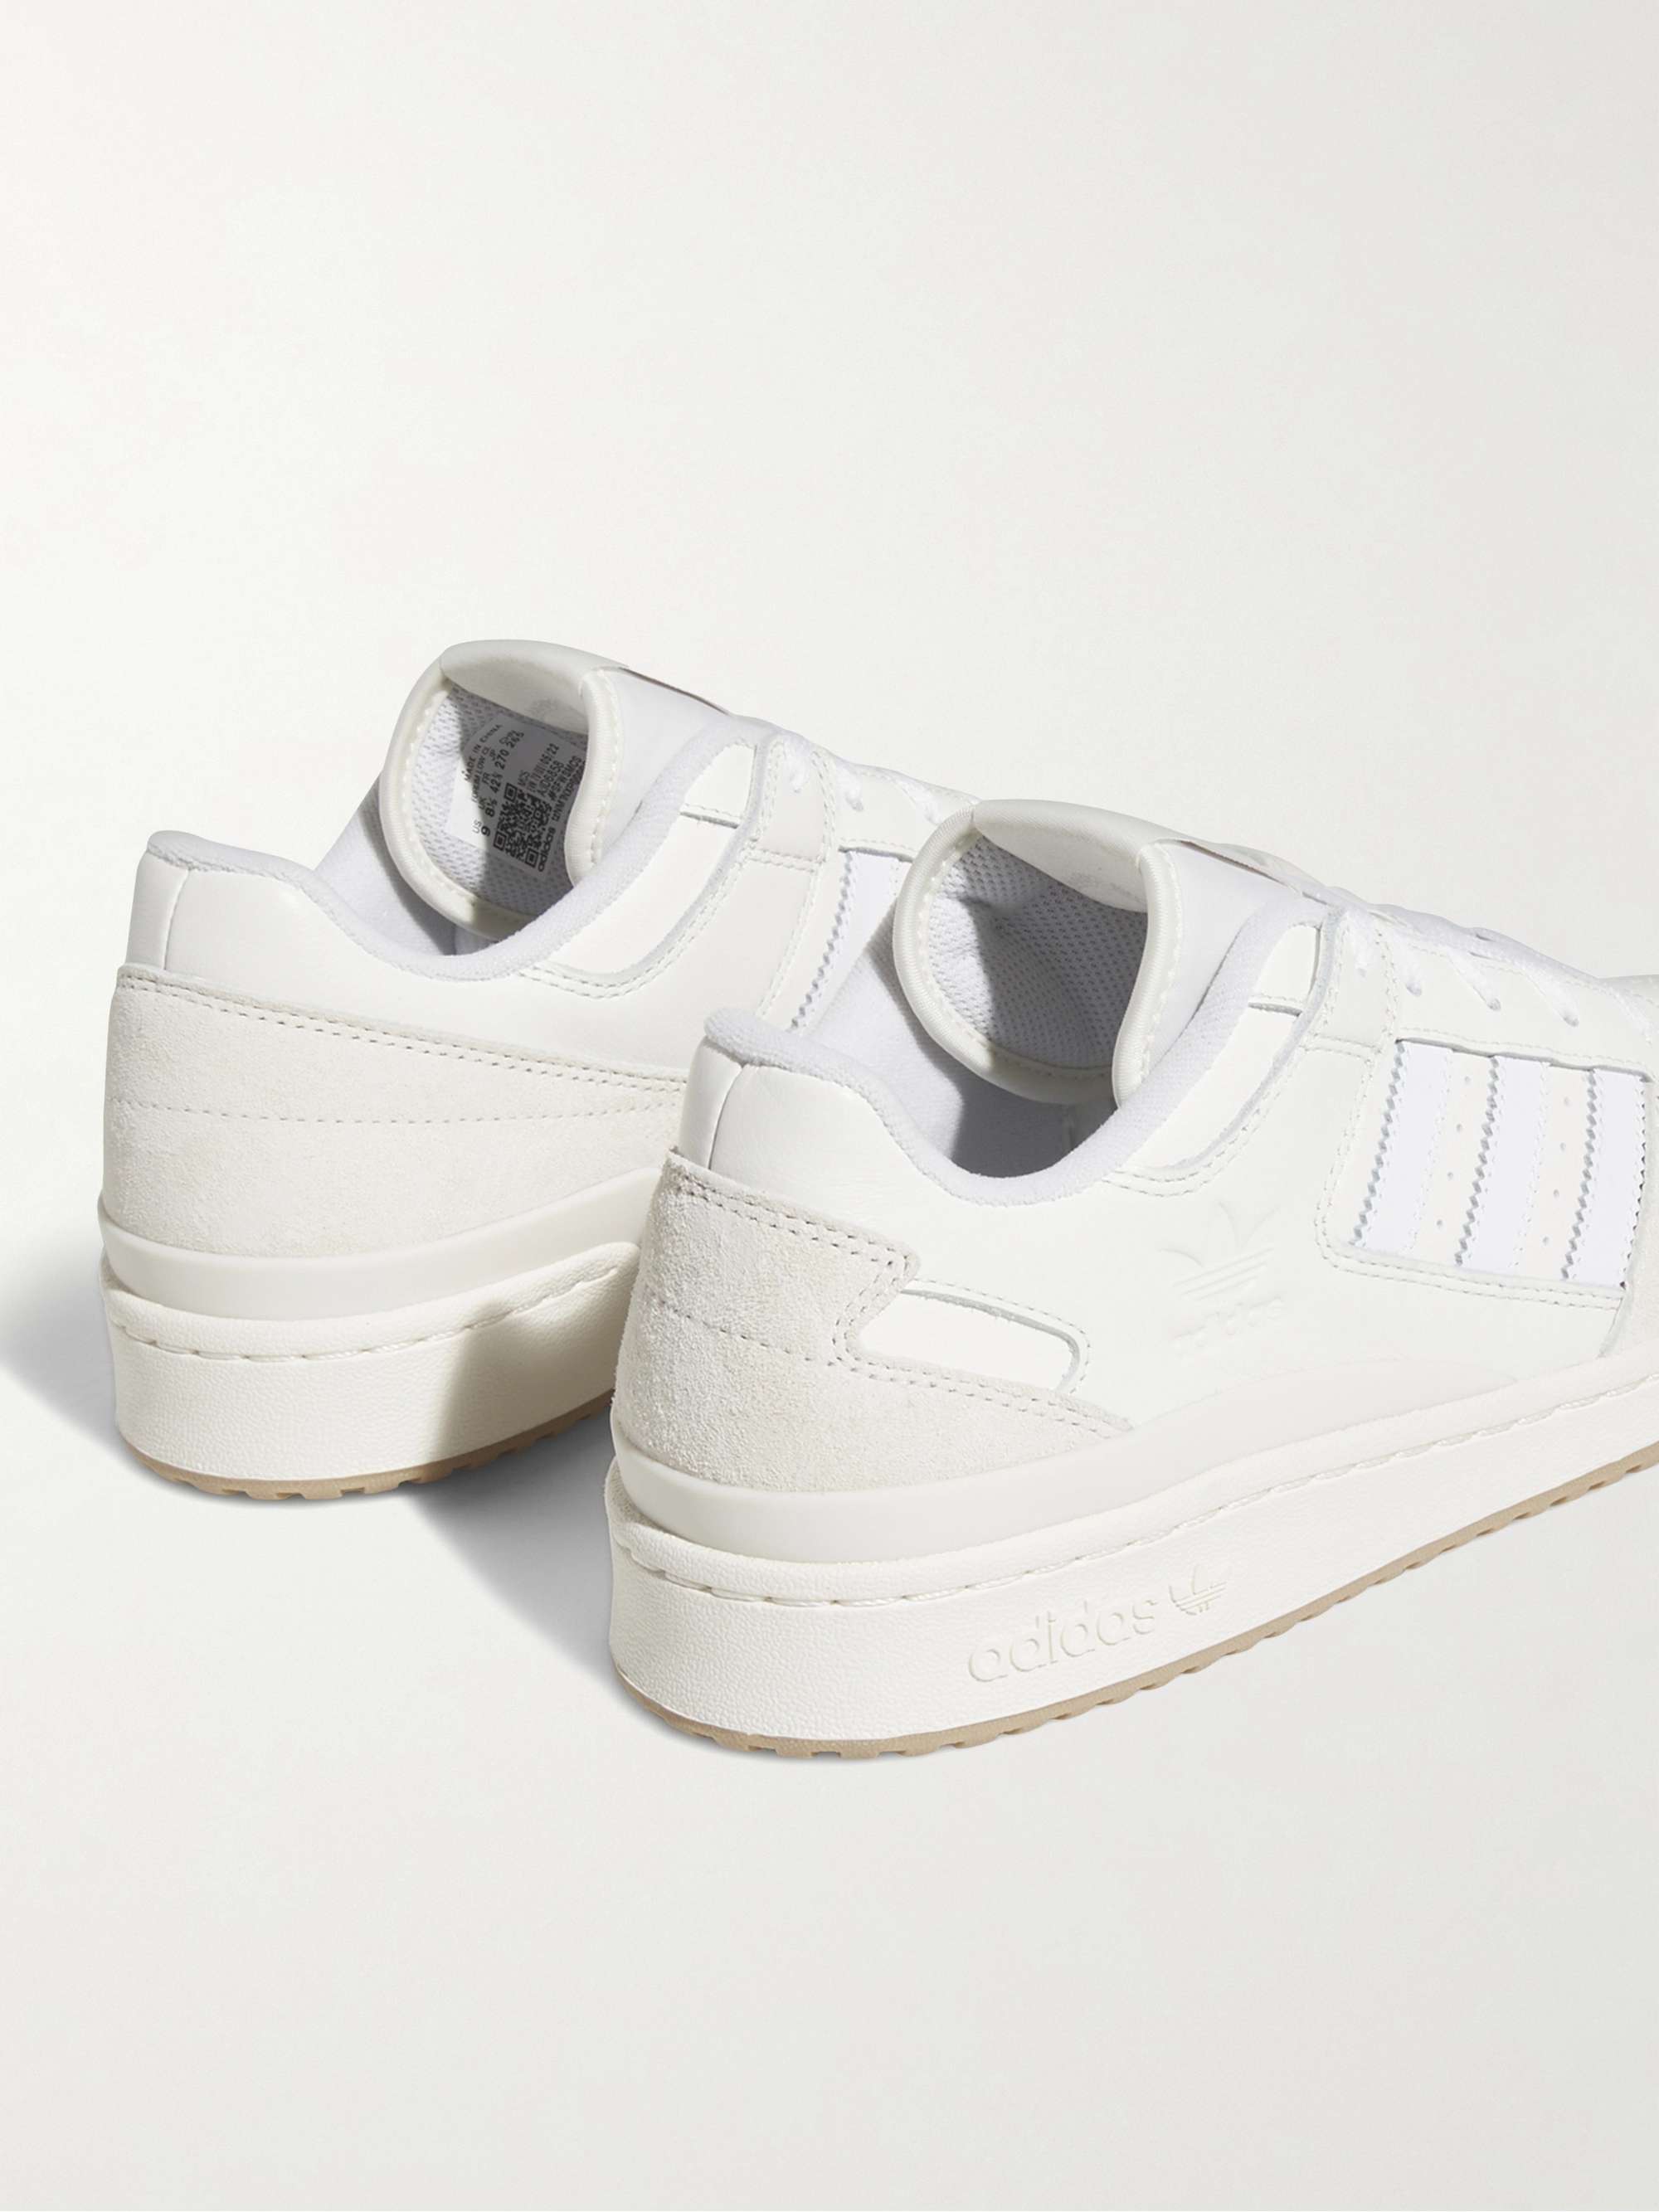 ADIDAS ORIGINALS Forum Low Suede-Trimmed Leather Sneakers | MR PORTER